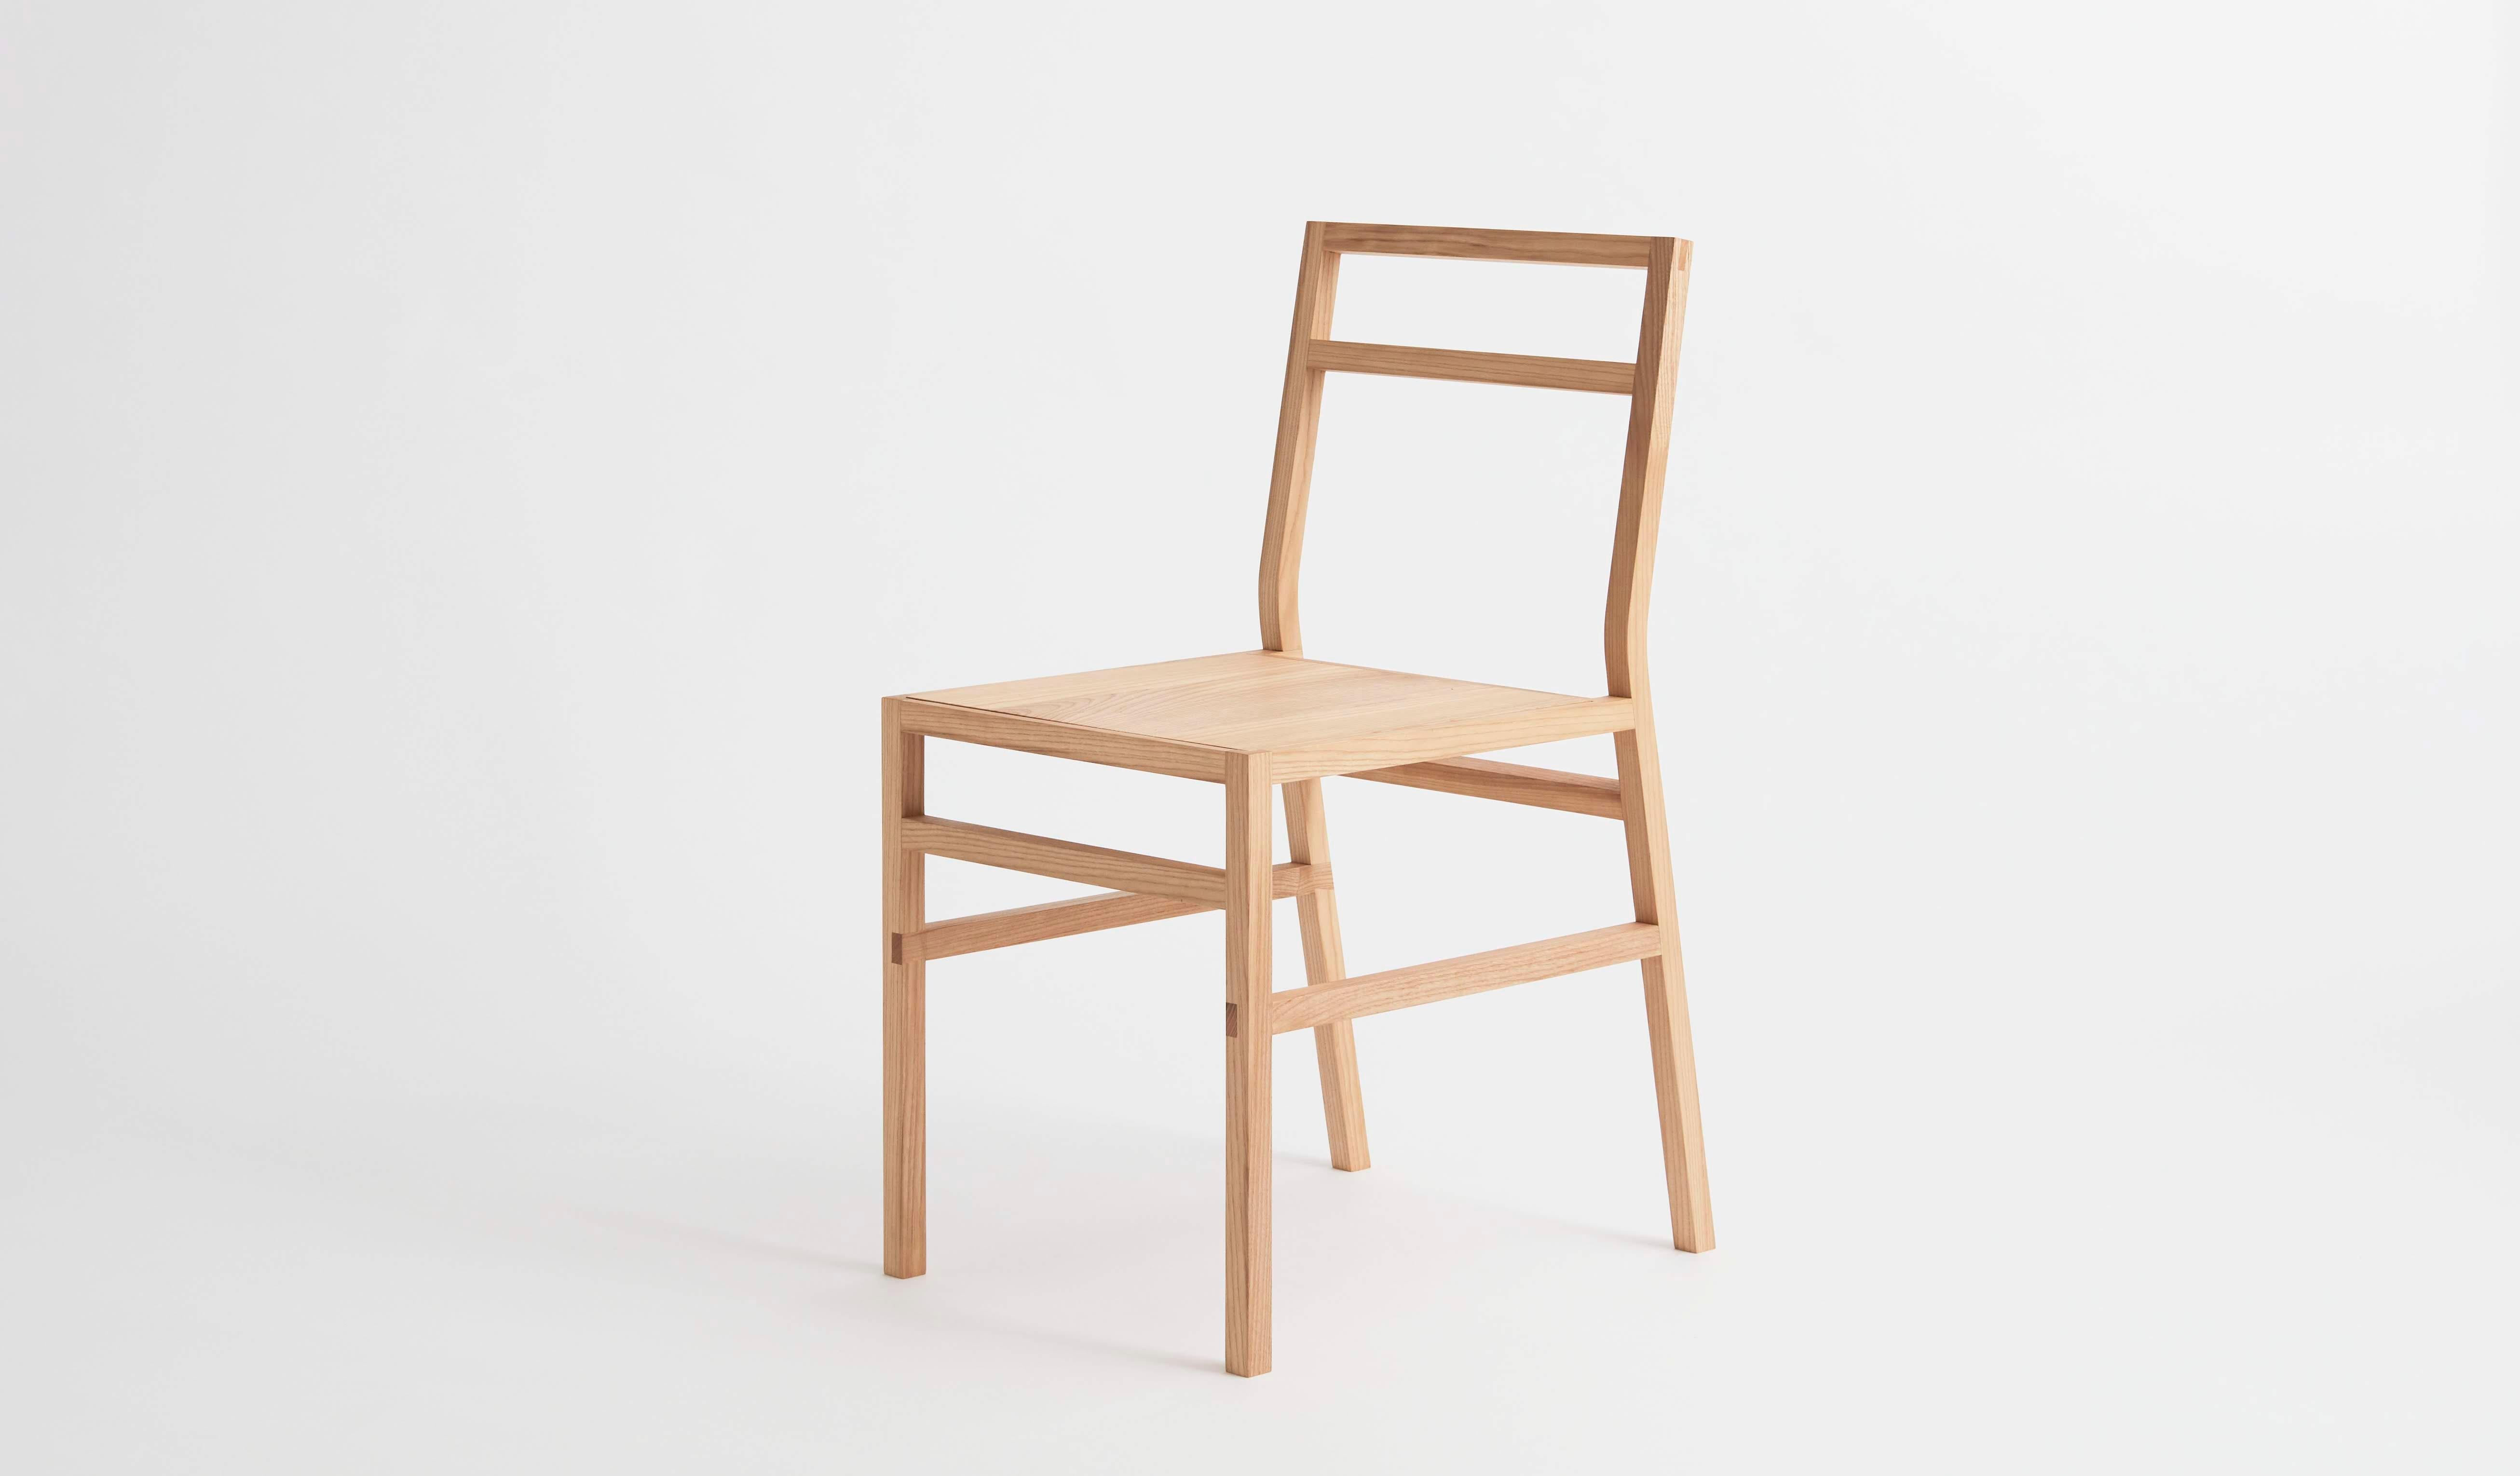 Organic Modern Dining Chair, Solid Ash, Wood, Handmade by Loose Fit, UK In New Condition For Sale In Bexhill-on-Sea East Sussex, GB